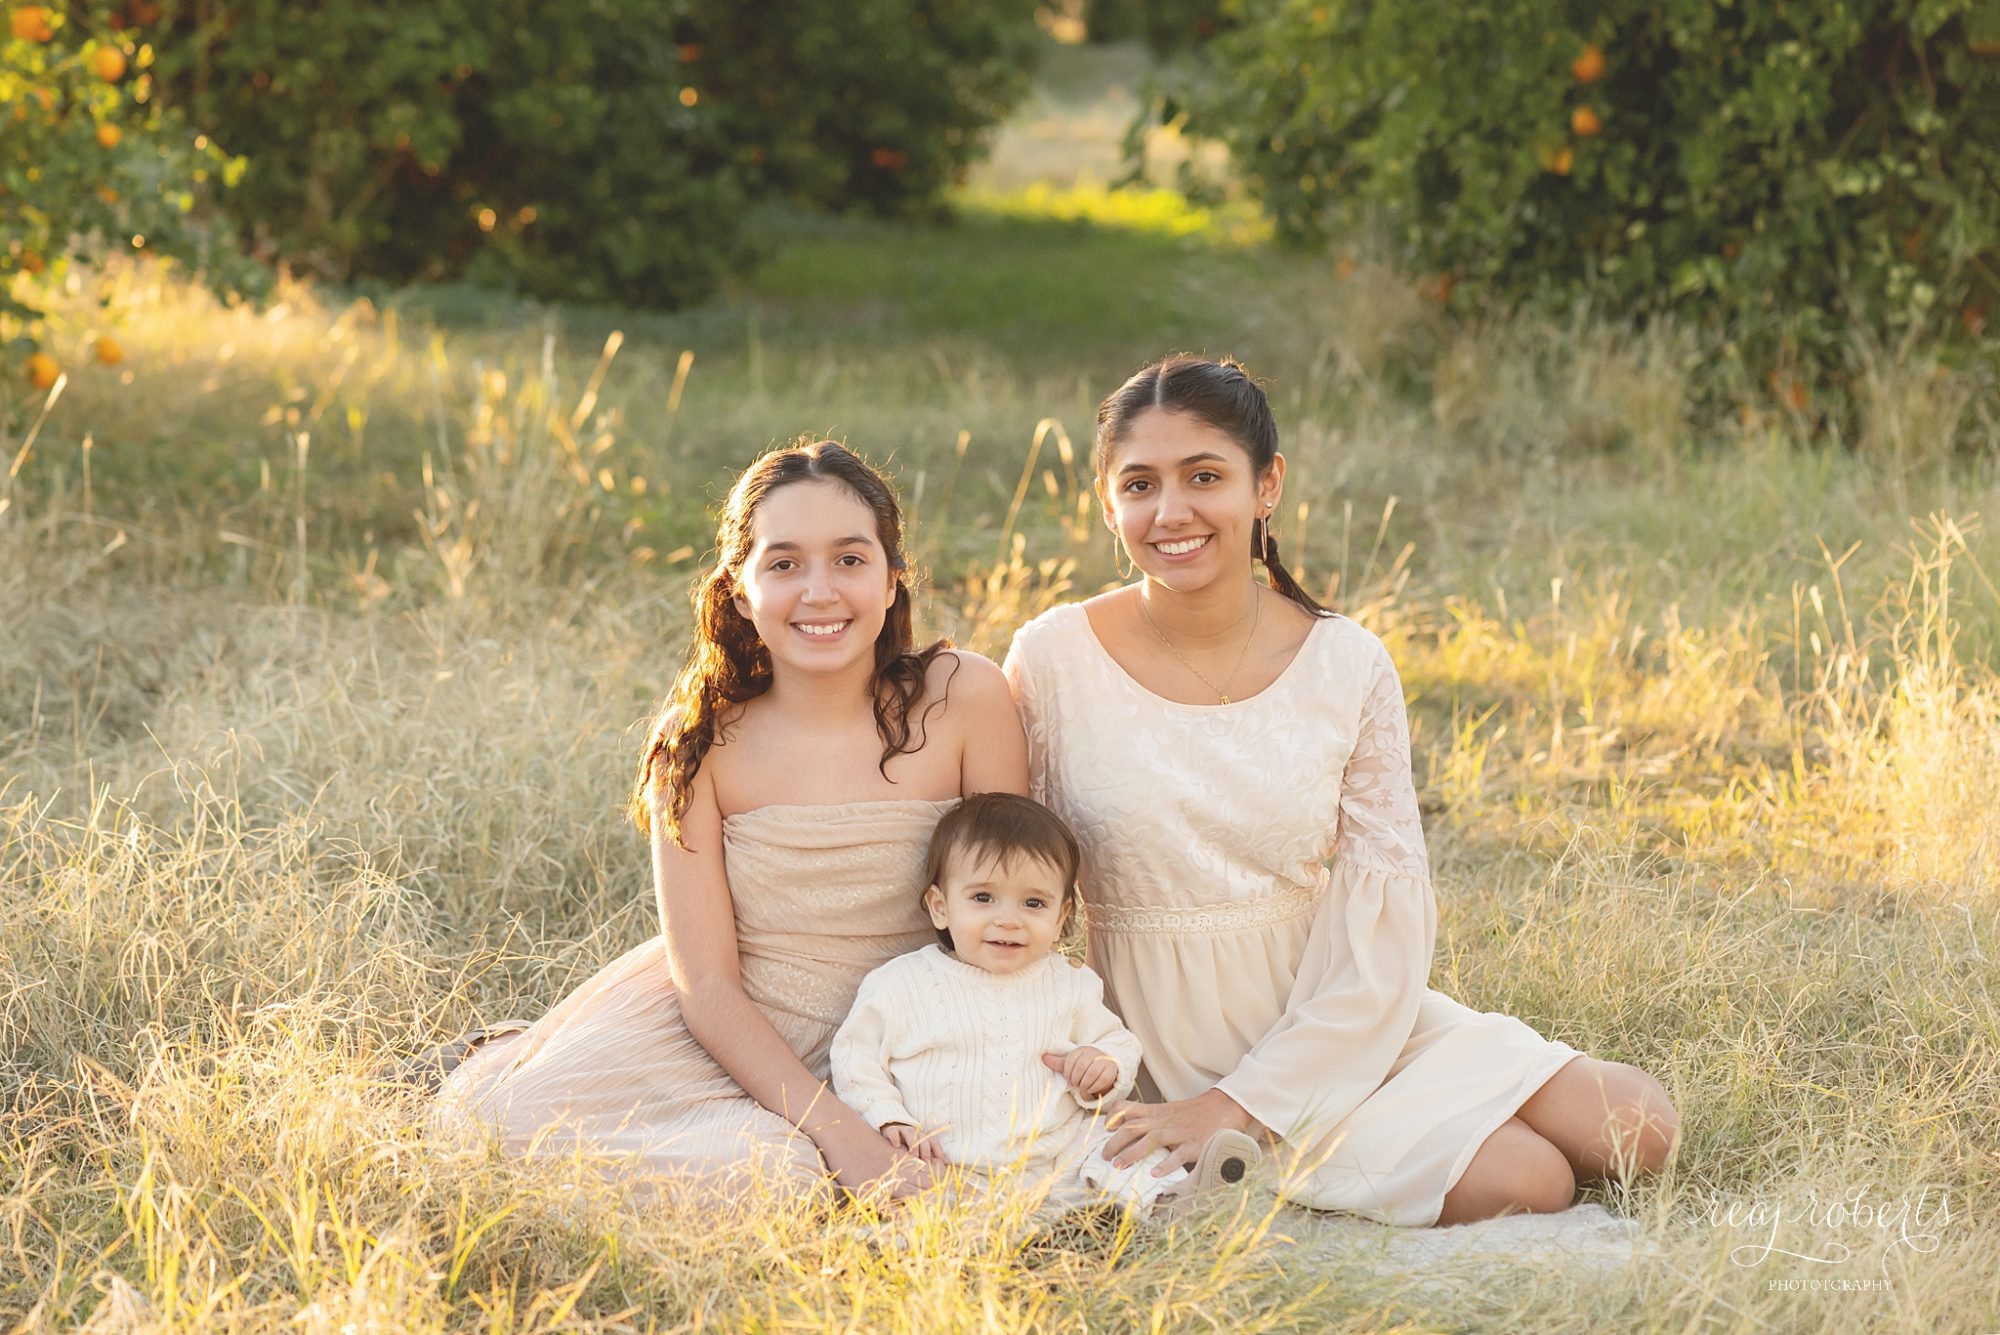 Family Photographer in Phoenix | Chandler Family Photos in Orange Grove Field | Neutral Children's Clothing